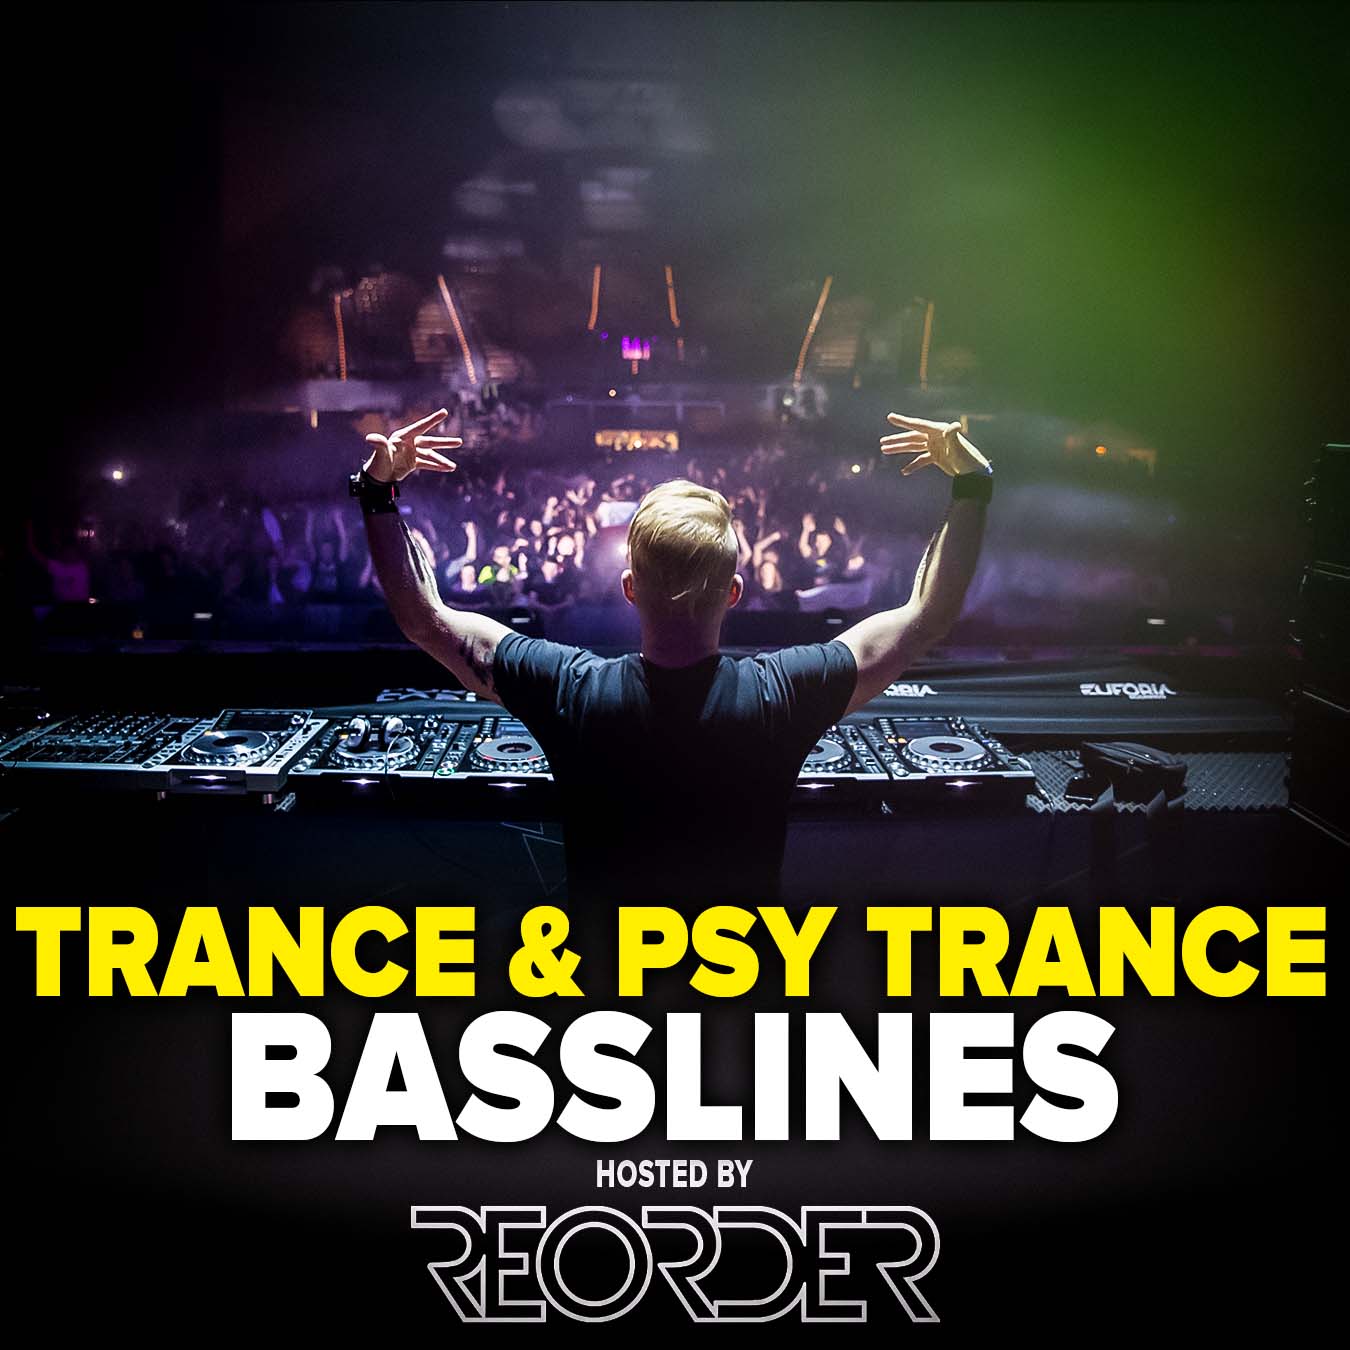 How To Make Trance Bass, Psy Trance Bass explained, bass for trance masterclass with reorder